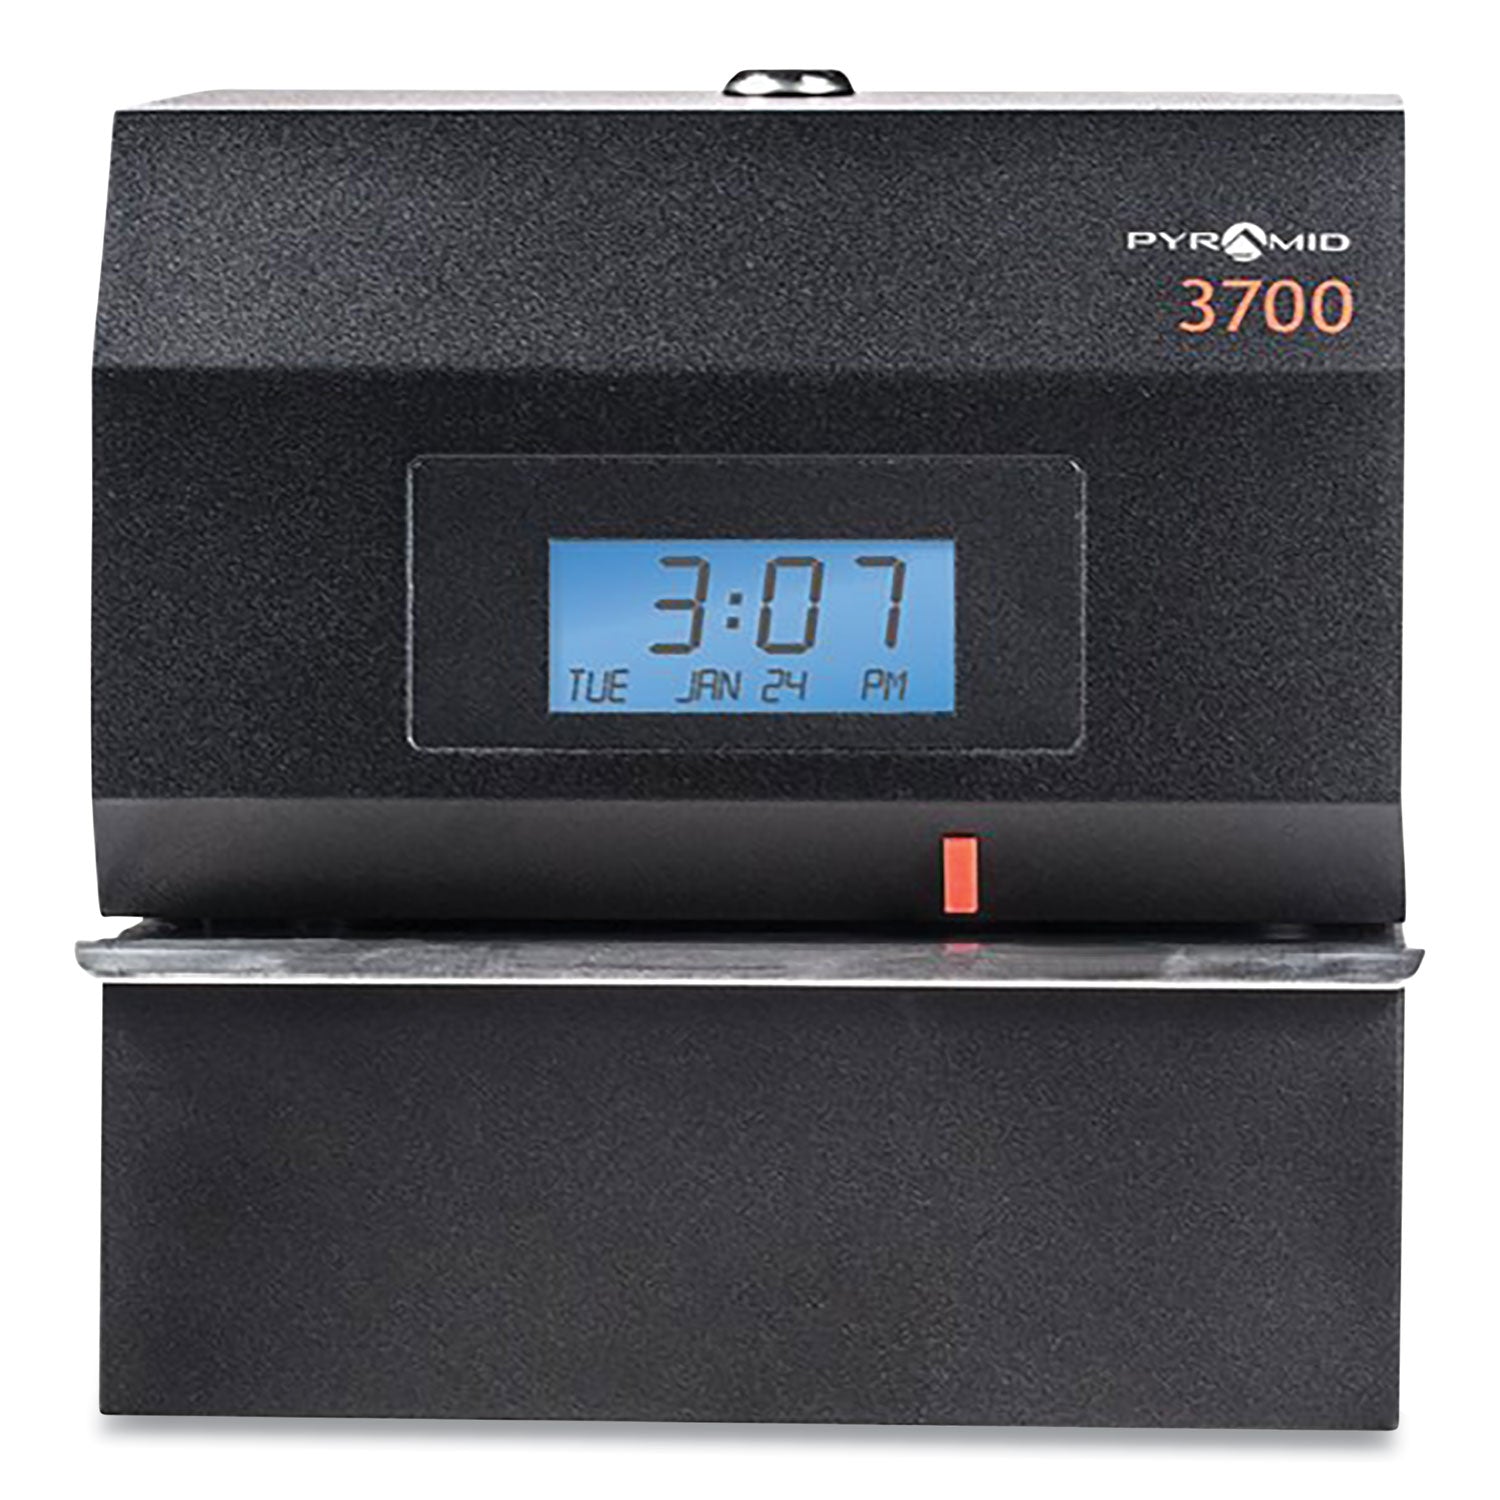 3700 Heavy-Duty Time Clock and Document Stamp, LCD Display, Black - 